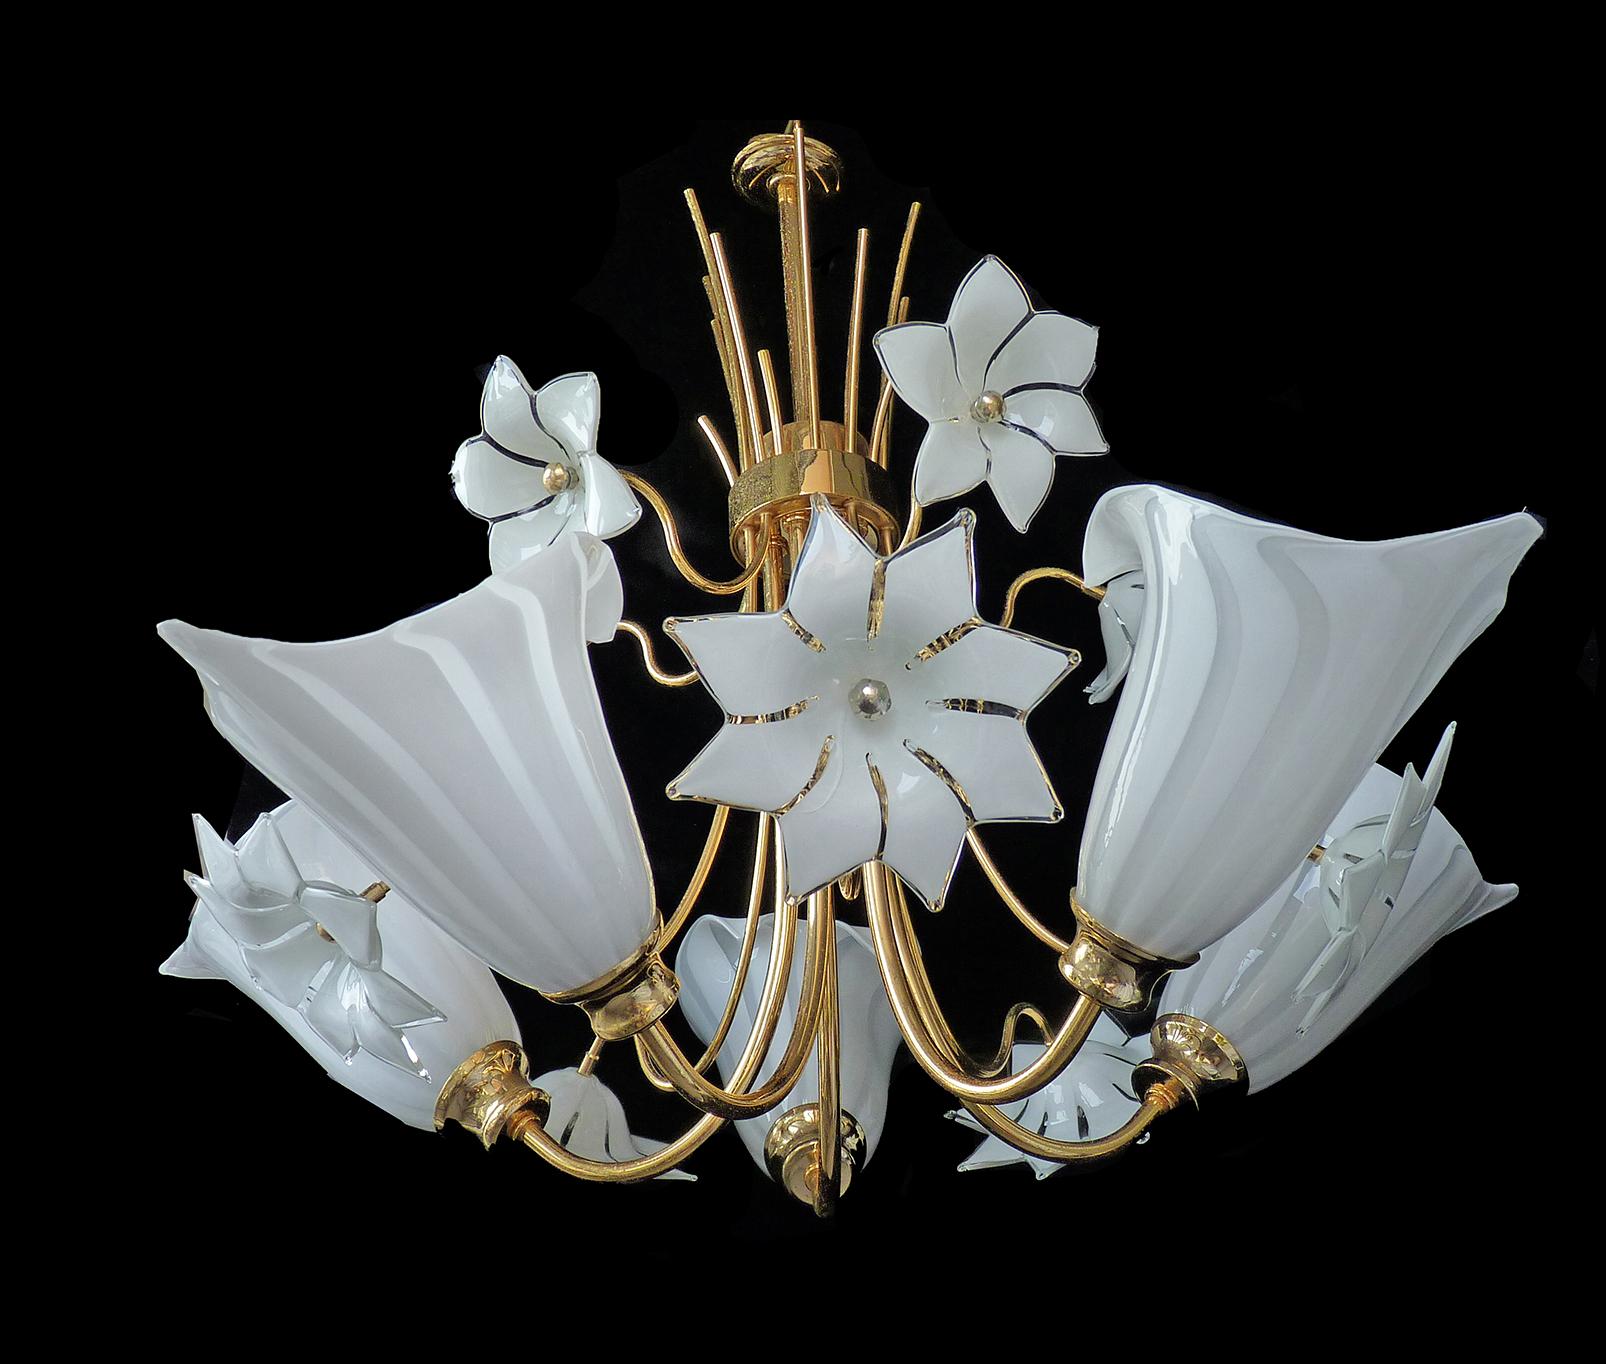 Awesome 1970s vintage Italian Murano Lily Calla art glass shades gilt chandelier. Franco Luce Seguso chandelier with hand blown Murano glass shades, white and clear glass and gold-plated brass.
Measures:
Diameter 28.5 in/ 72 cm
Height 39.4 in/ 100